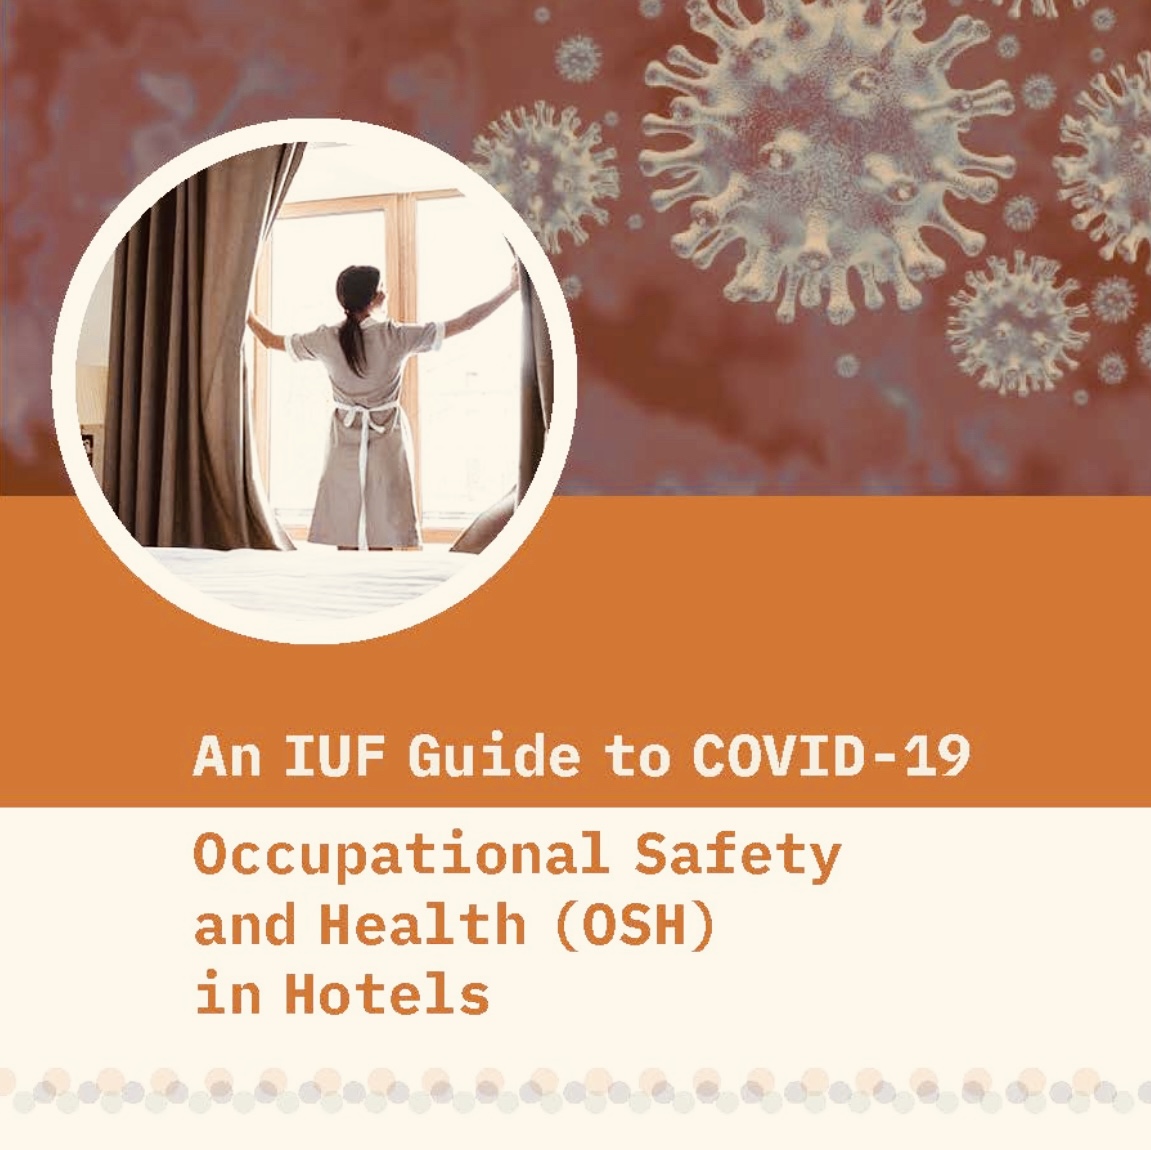 Osh Calendar 2022 Iuf Launches New Covid-19 Safety Guide For Hotel Workers - Iuf